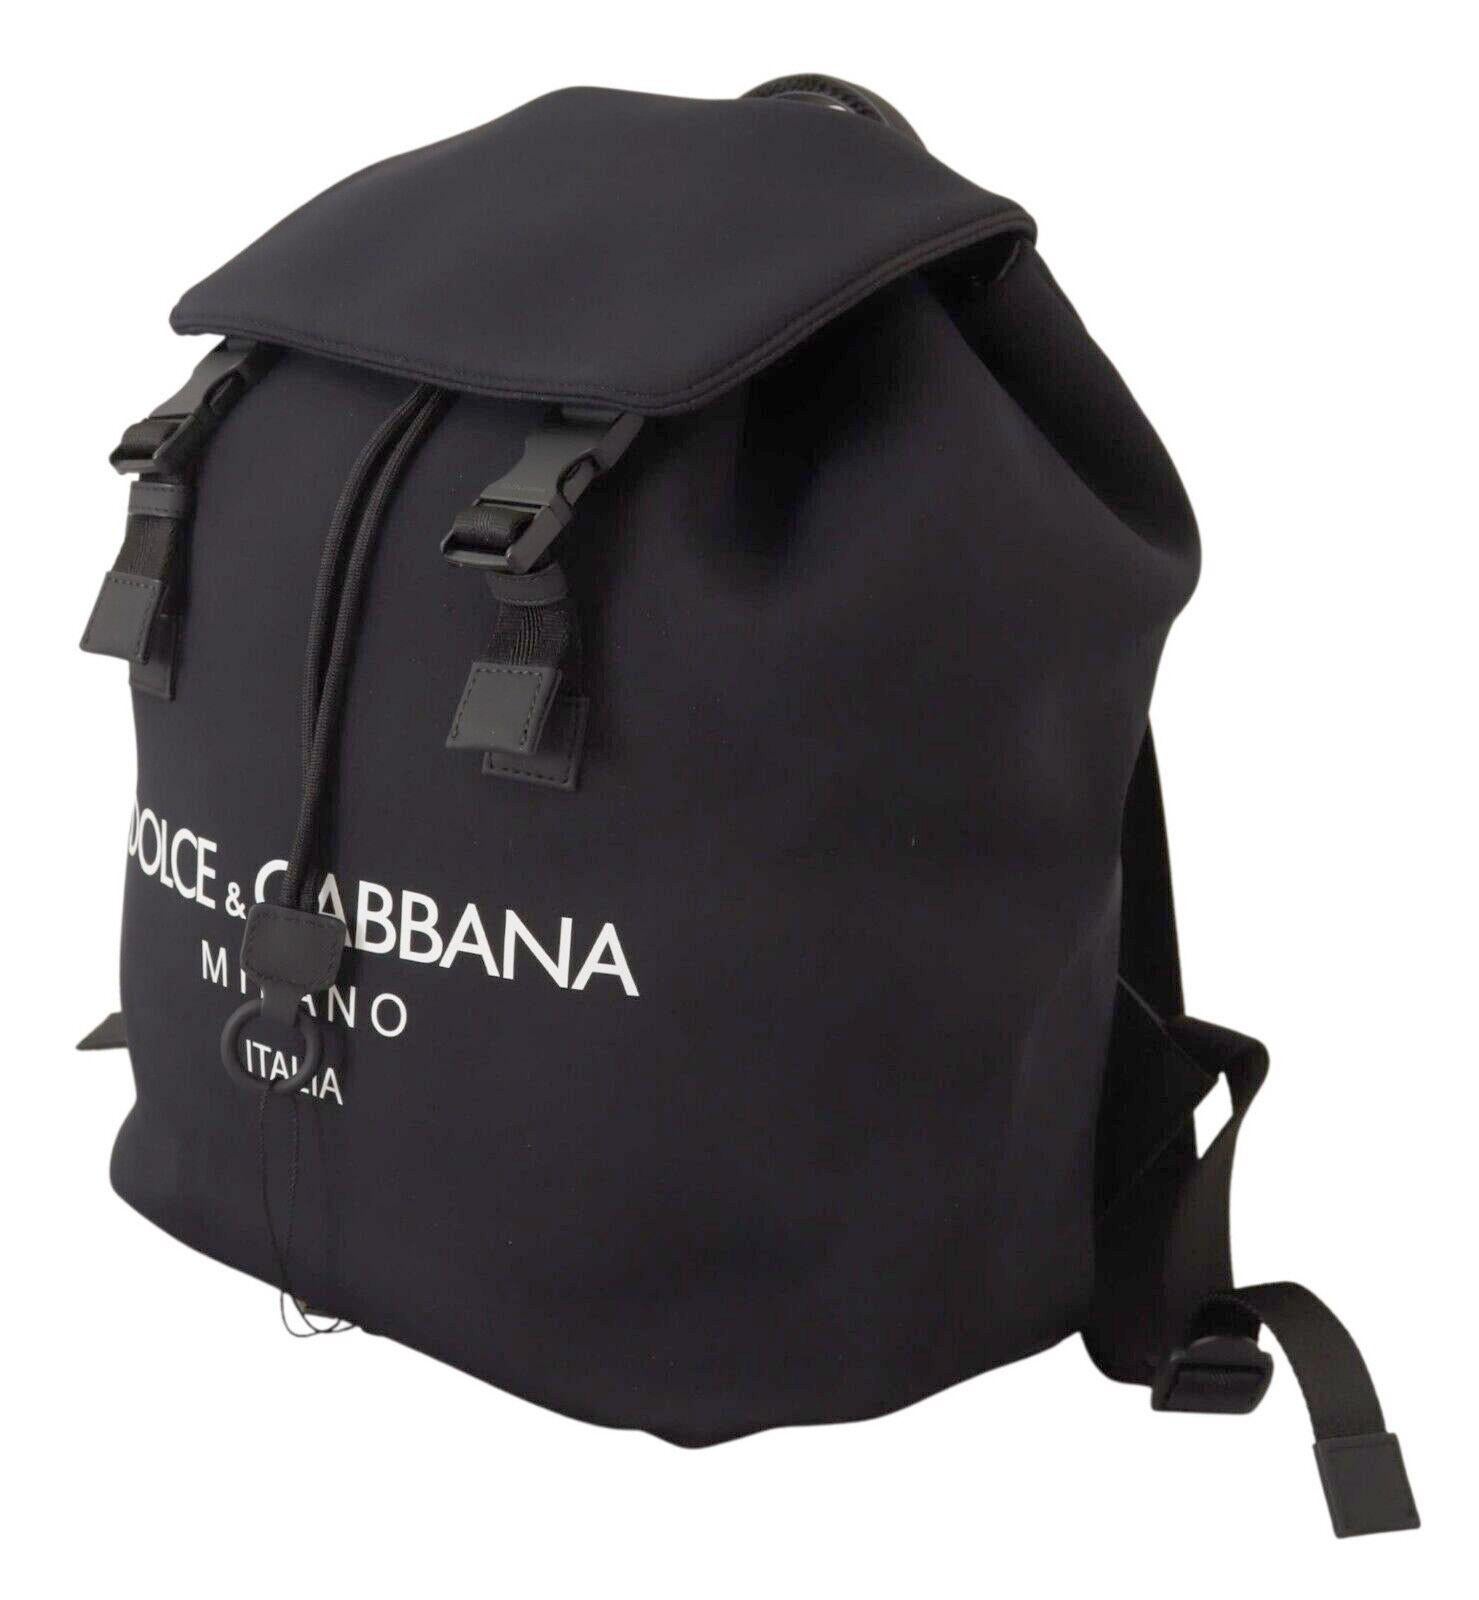 DOLCE & GABBANA



Absolutely stunning, 100% Authentic, brand new with tags Dolce & Gabbana men's backpack in black. It has features like back adjustable straps and front logo.



Model: Backpack bag

Color: Black

Material: Neoprene

Drawstring